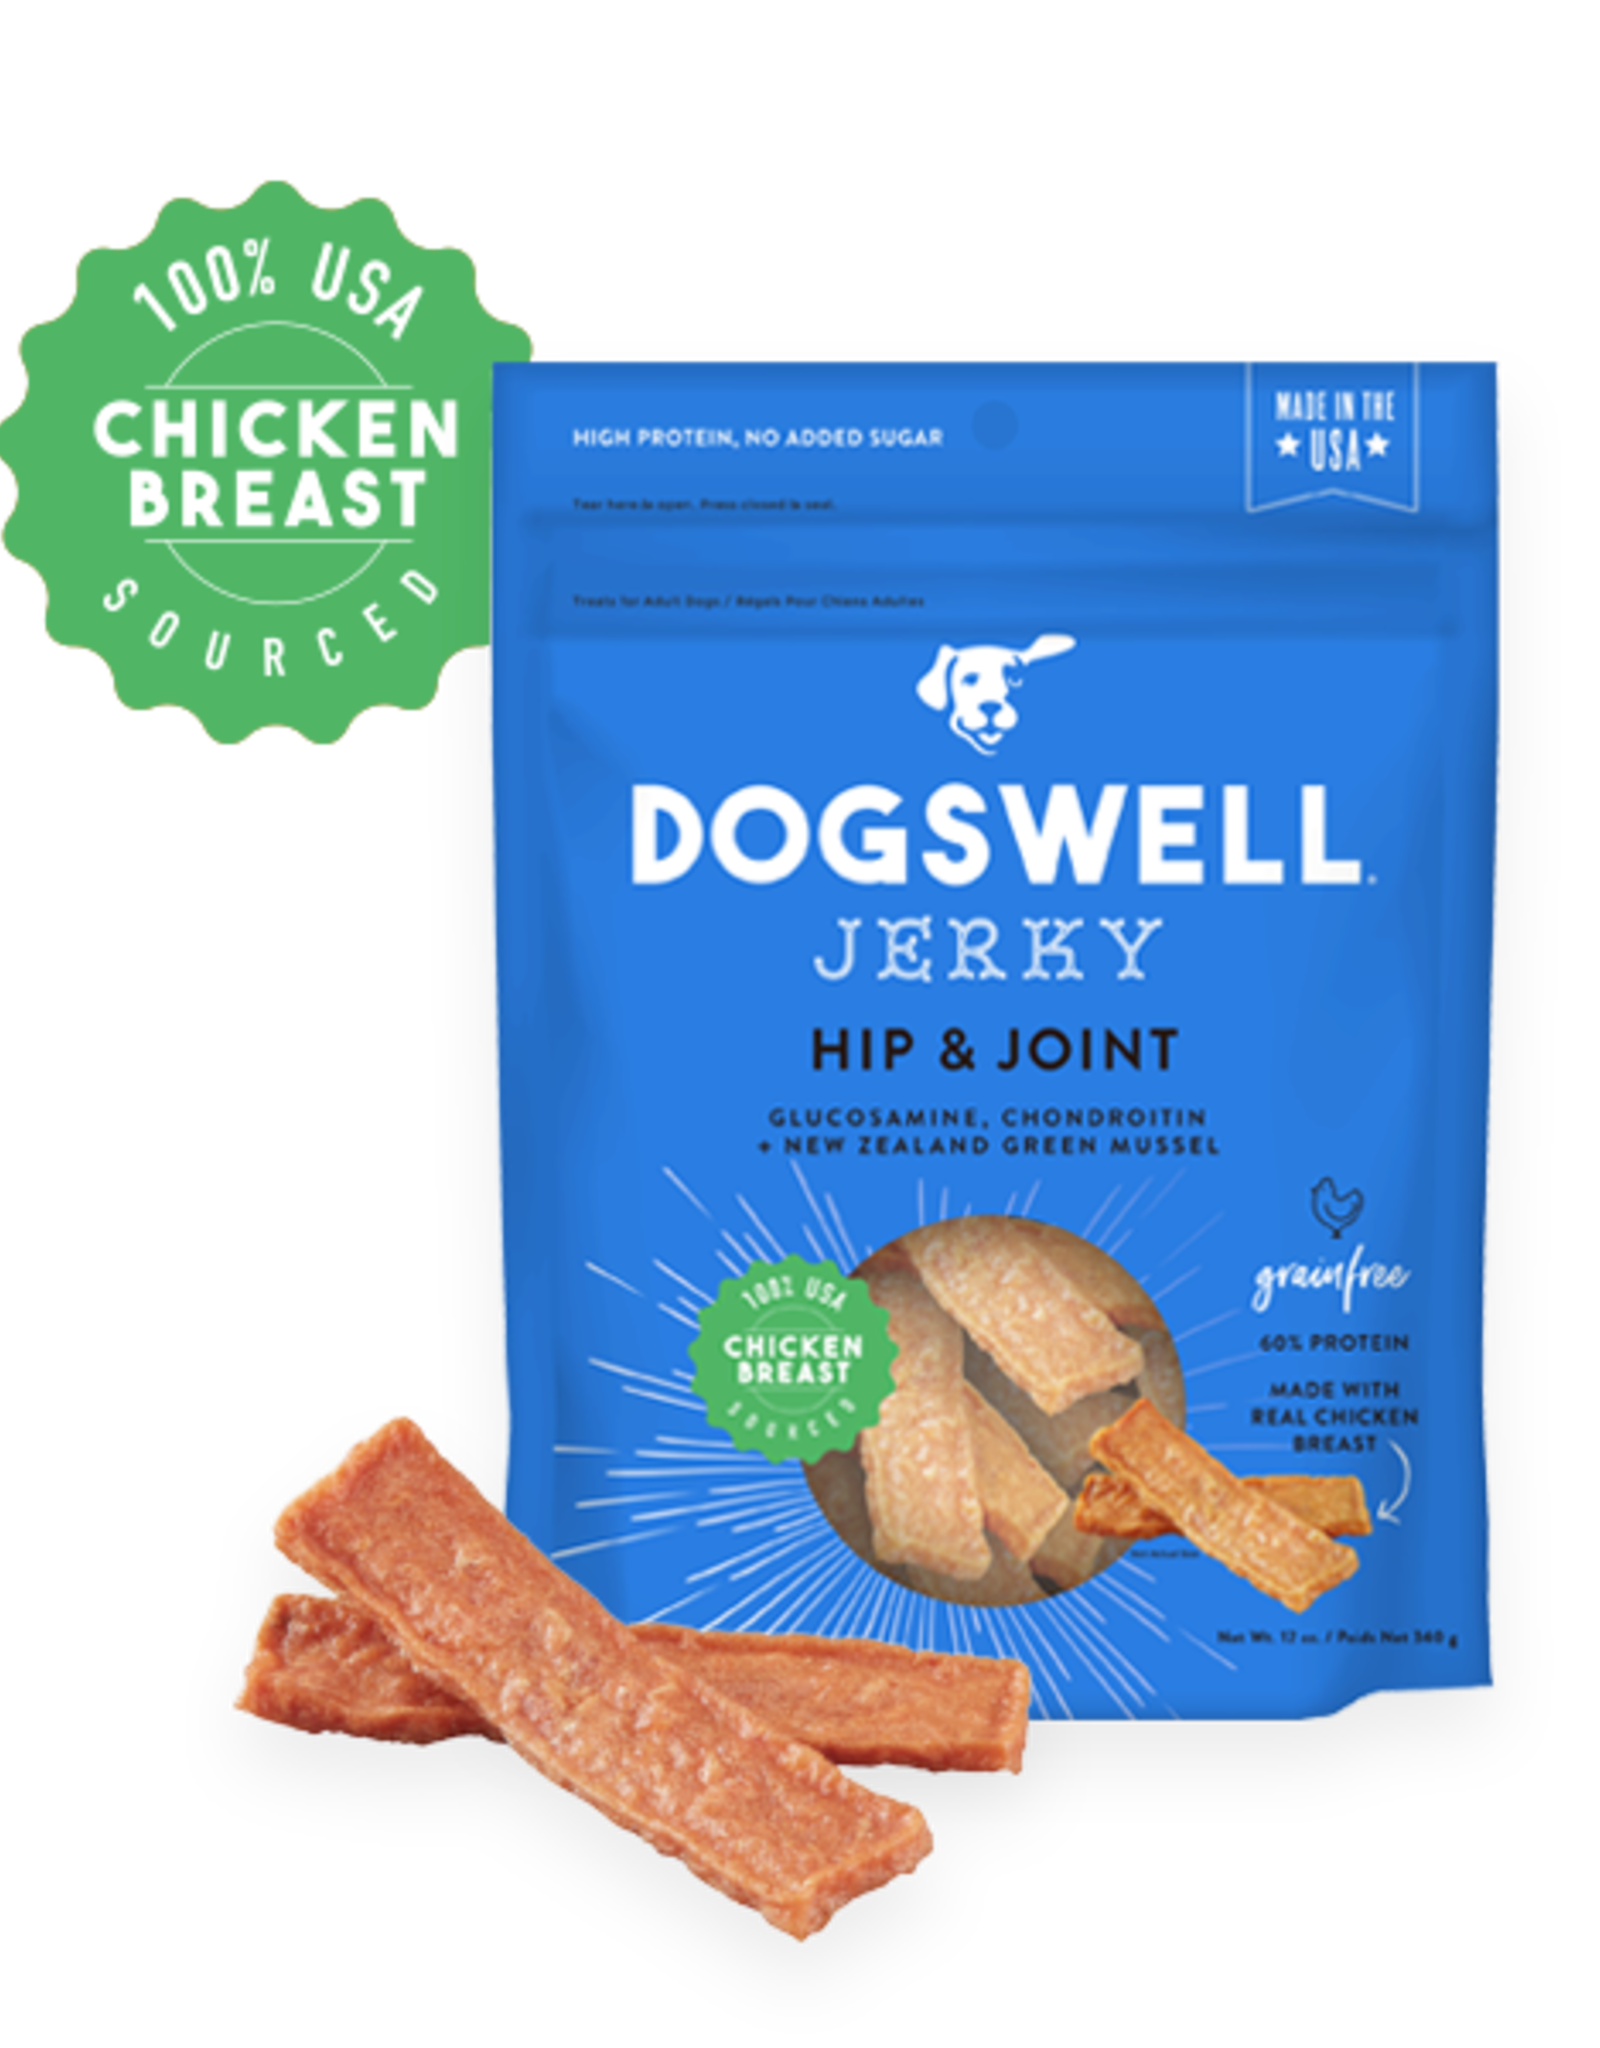 DOGSWELL, LLC DOGSWELL HIP & JOINT CHICKEN BREAST JERKY 24OZ